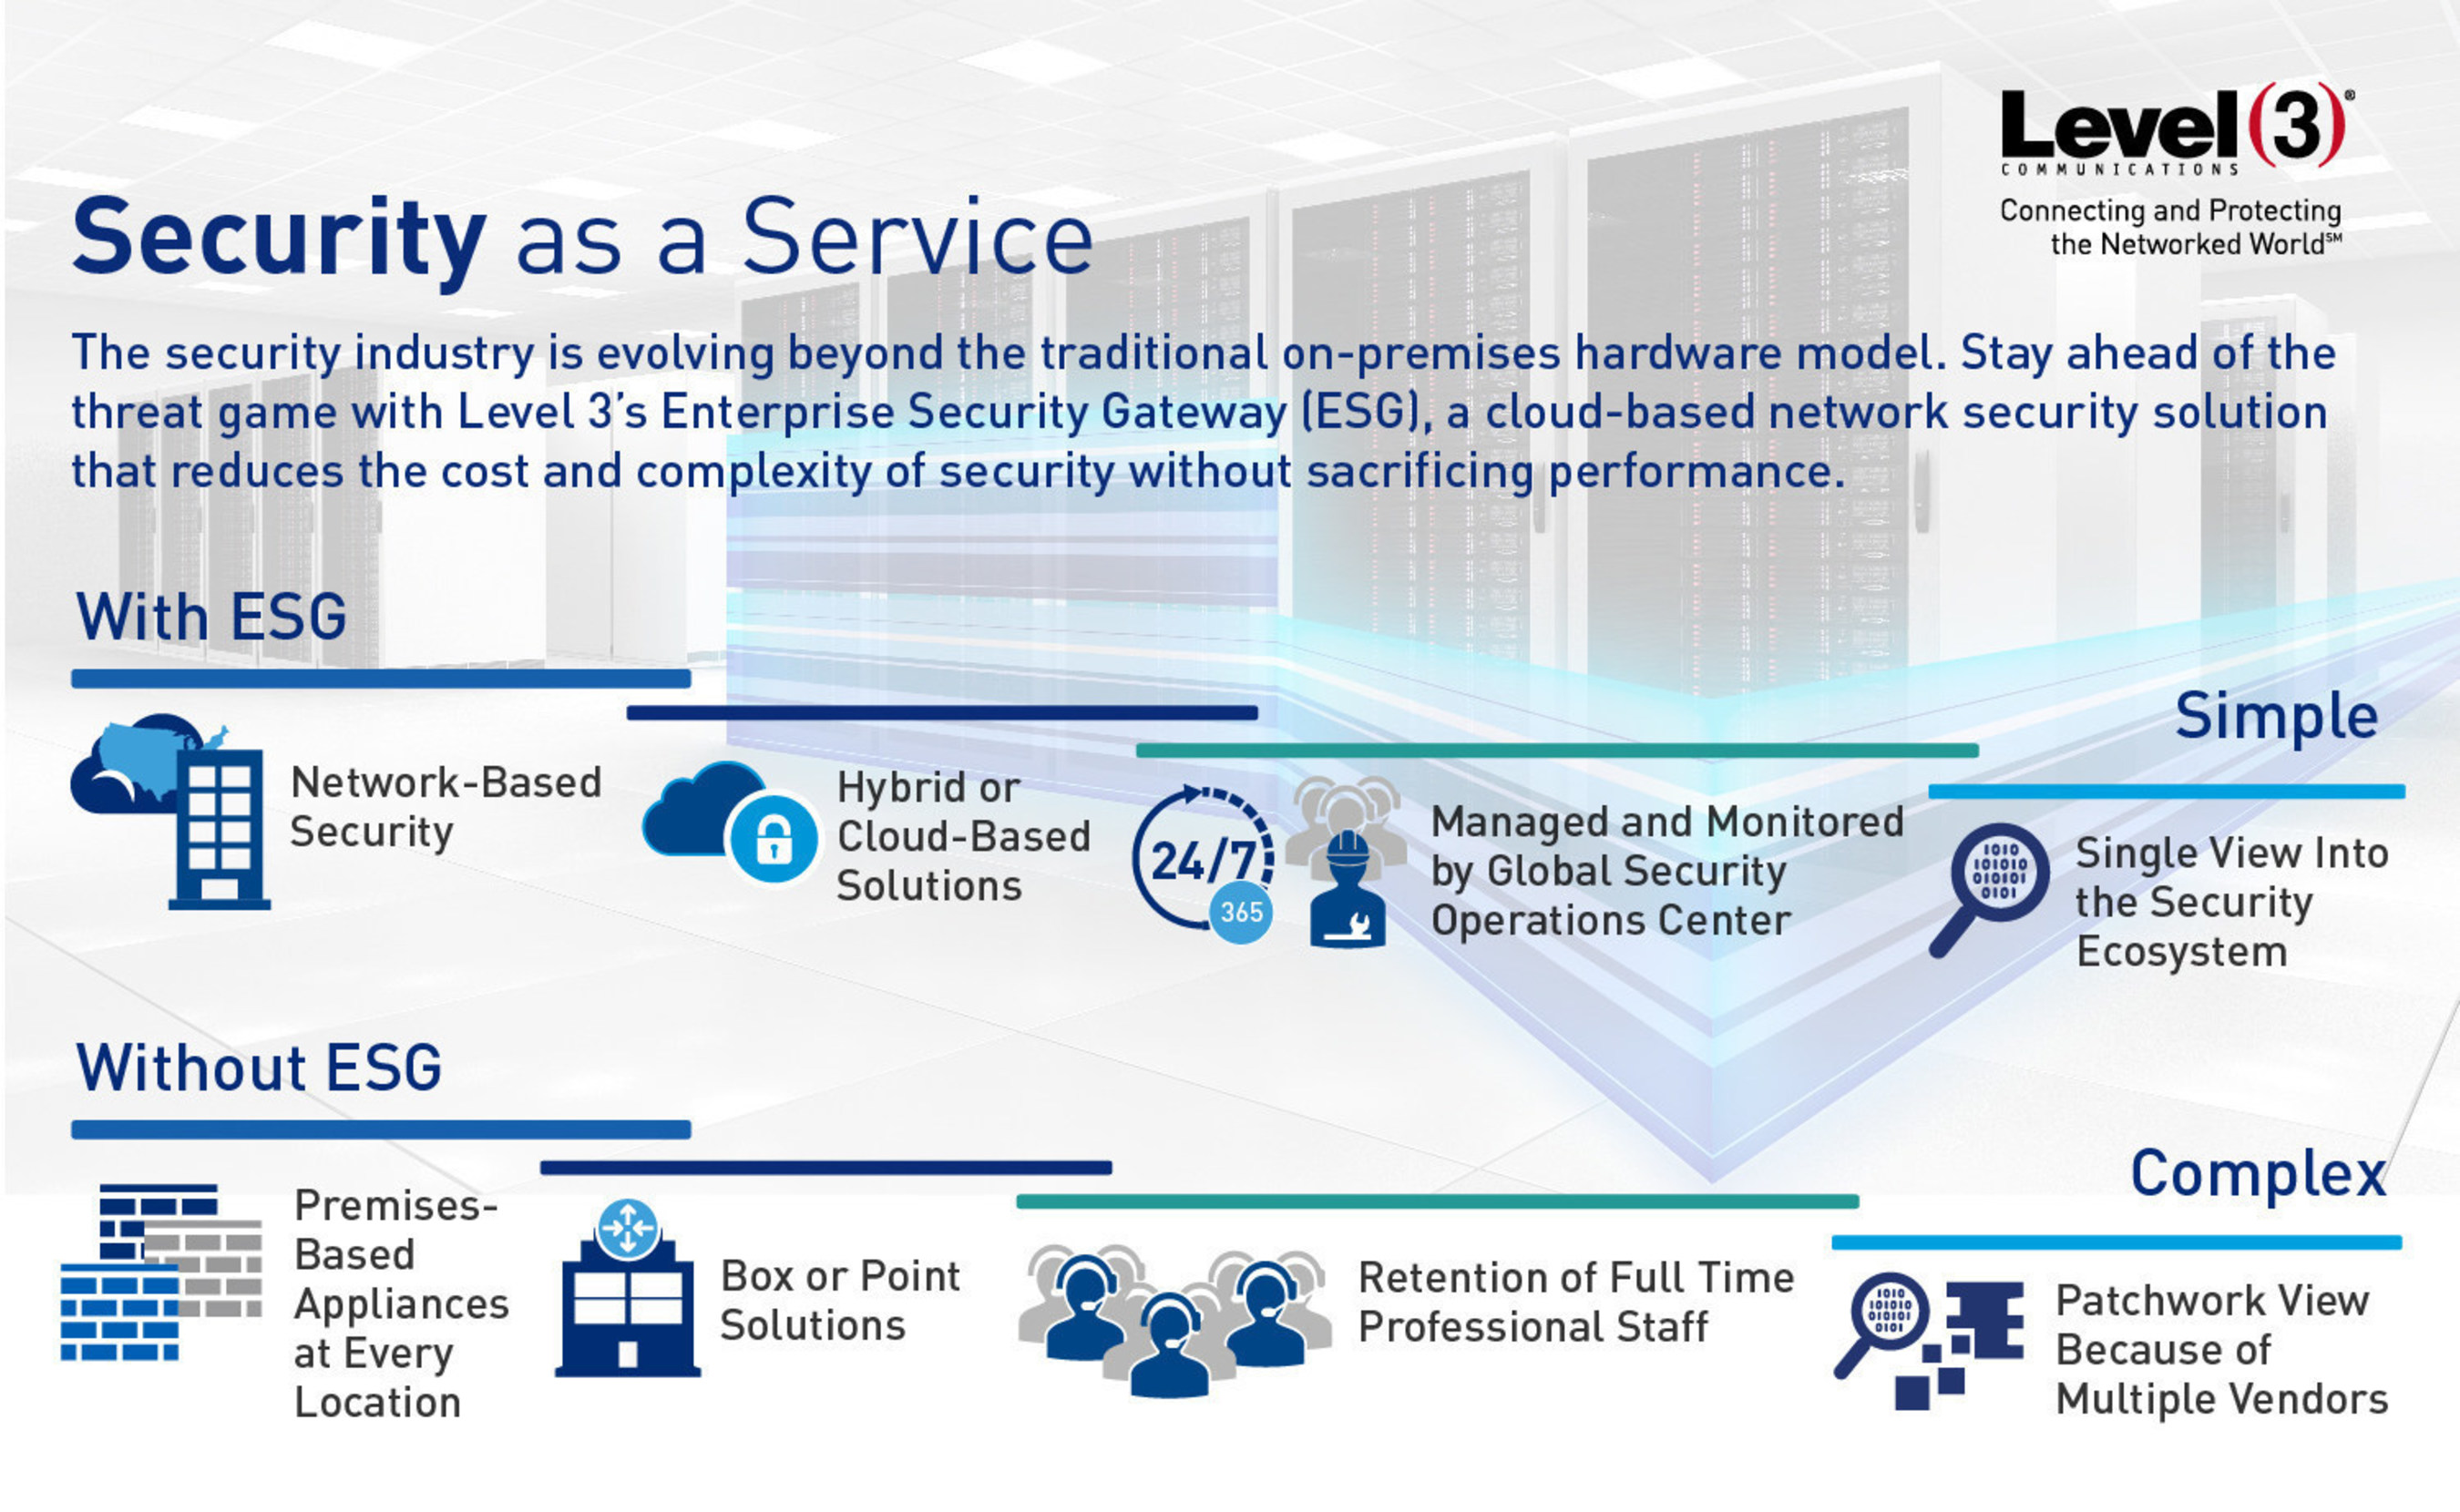 The security industry is evolving beyond the traditional on-premises hardware model to Security as a Service. Level 3 Communications launched Enterprise Security Gateway, a cloud-based network security solution to reduce the cost and complexity of security without sacrificing performance.